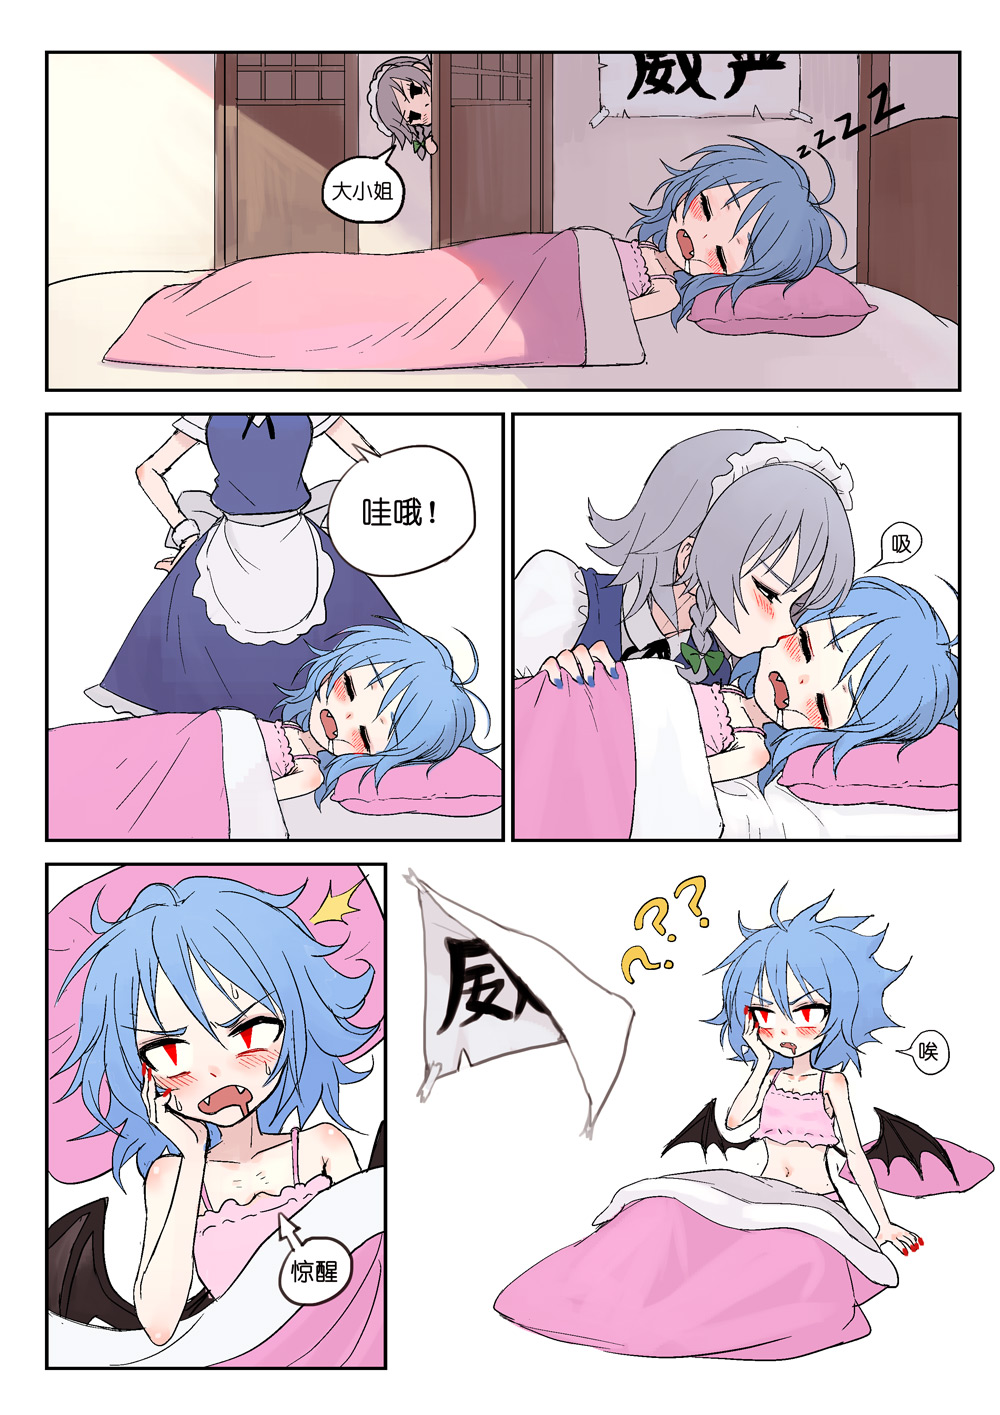 2girls apron bat_wings bed black_eyes blue_eyes chinese closed_eyes comic crop_top drooling fangs fkey highres indoors izayoi_sakuya kiss maid_headdress messy_hair multiple_girls nail_polish navel peeking_out pillow red_eyes red_nails remilia_scarlet silver_hair sleeping touhou translation_request under_covers waist_apron wings